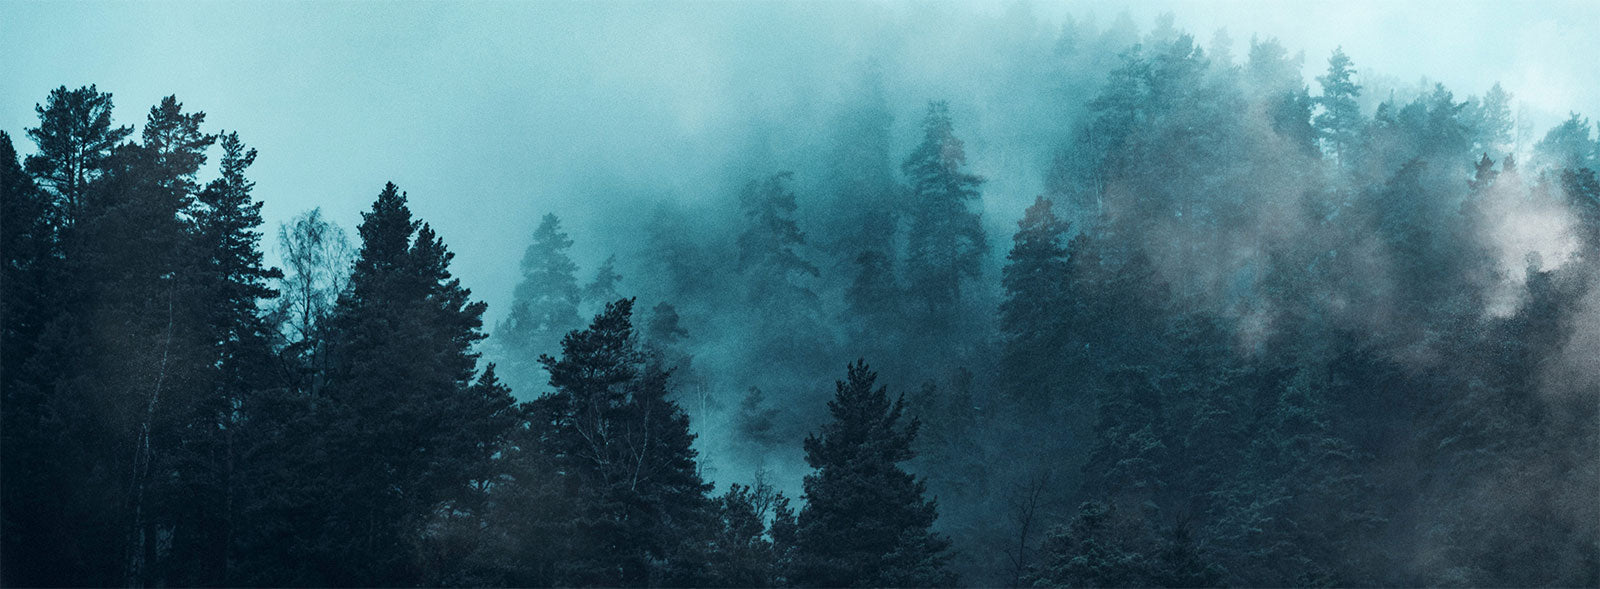 200+] Dark Forest Background s | Wallpapers.com